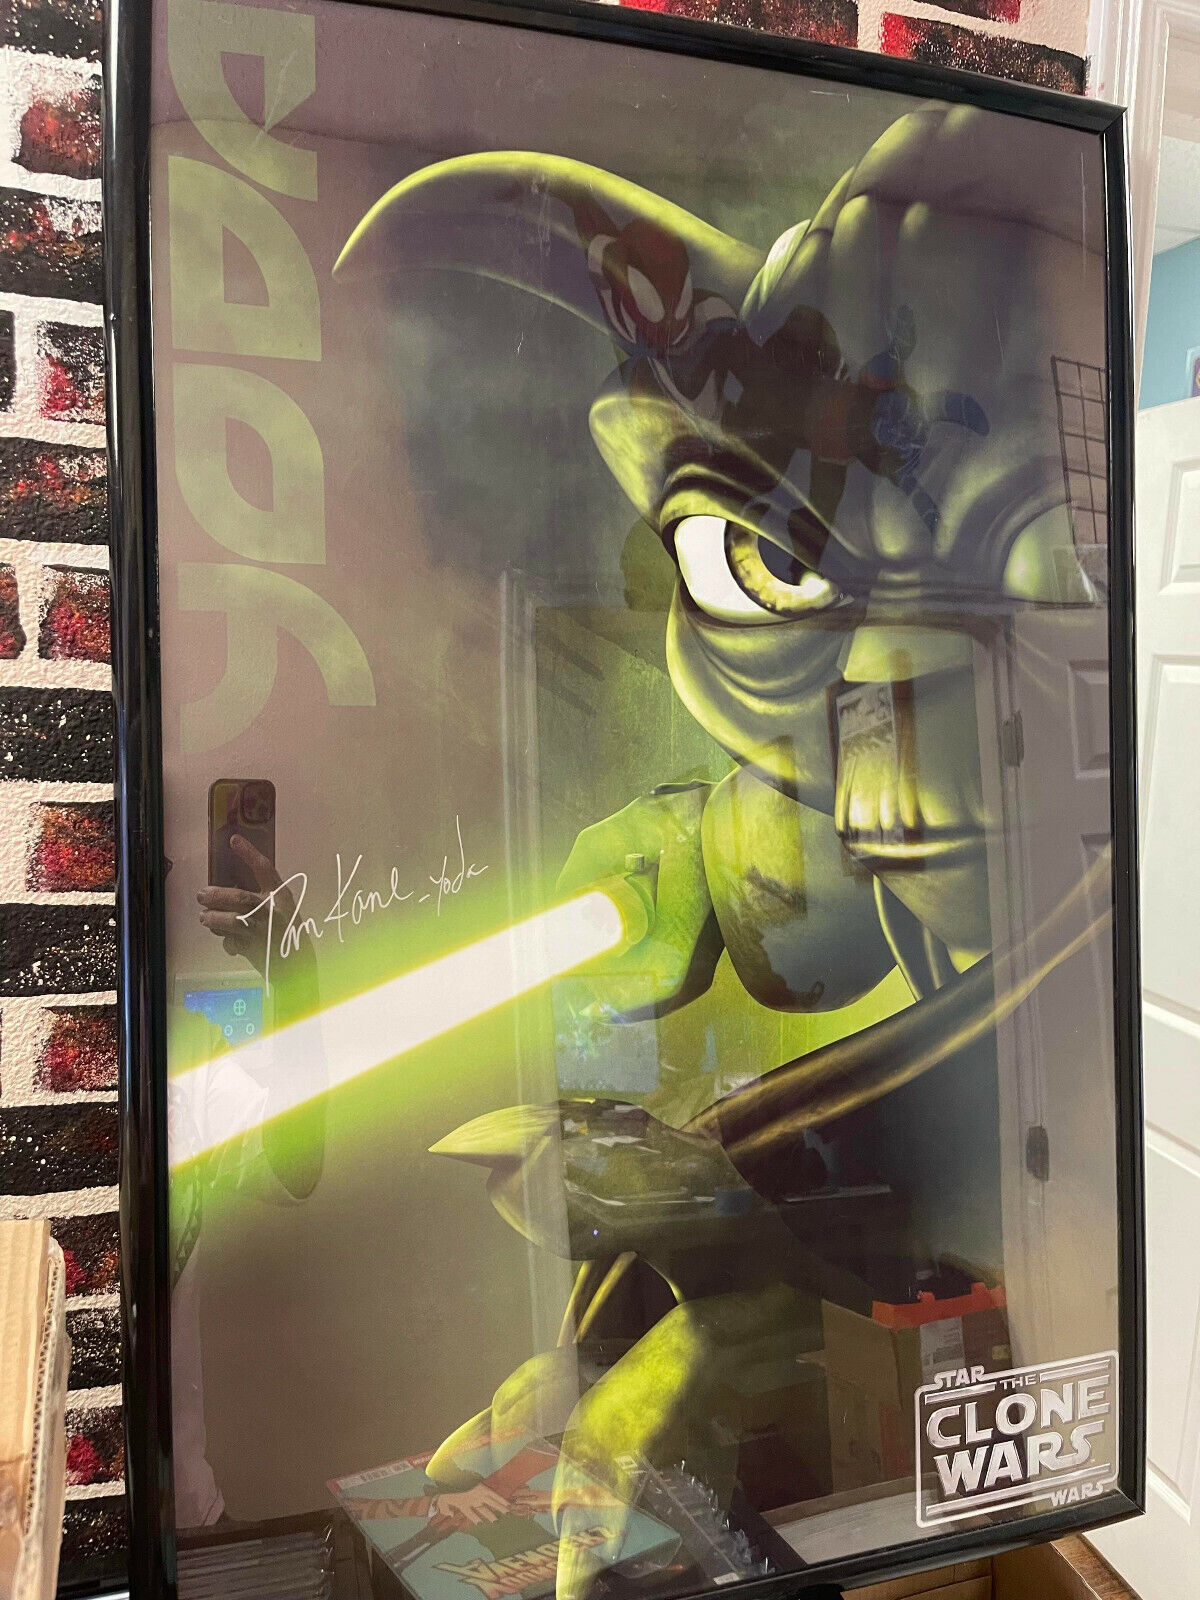 Star Wars - The Clone Wars - YODA ART PRINT PICTURE - Signed by Tom Kane